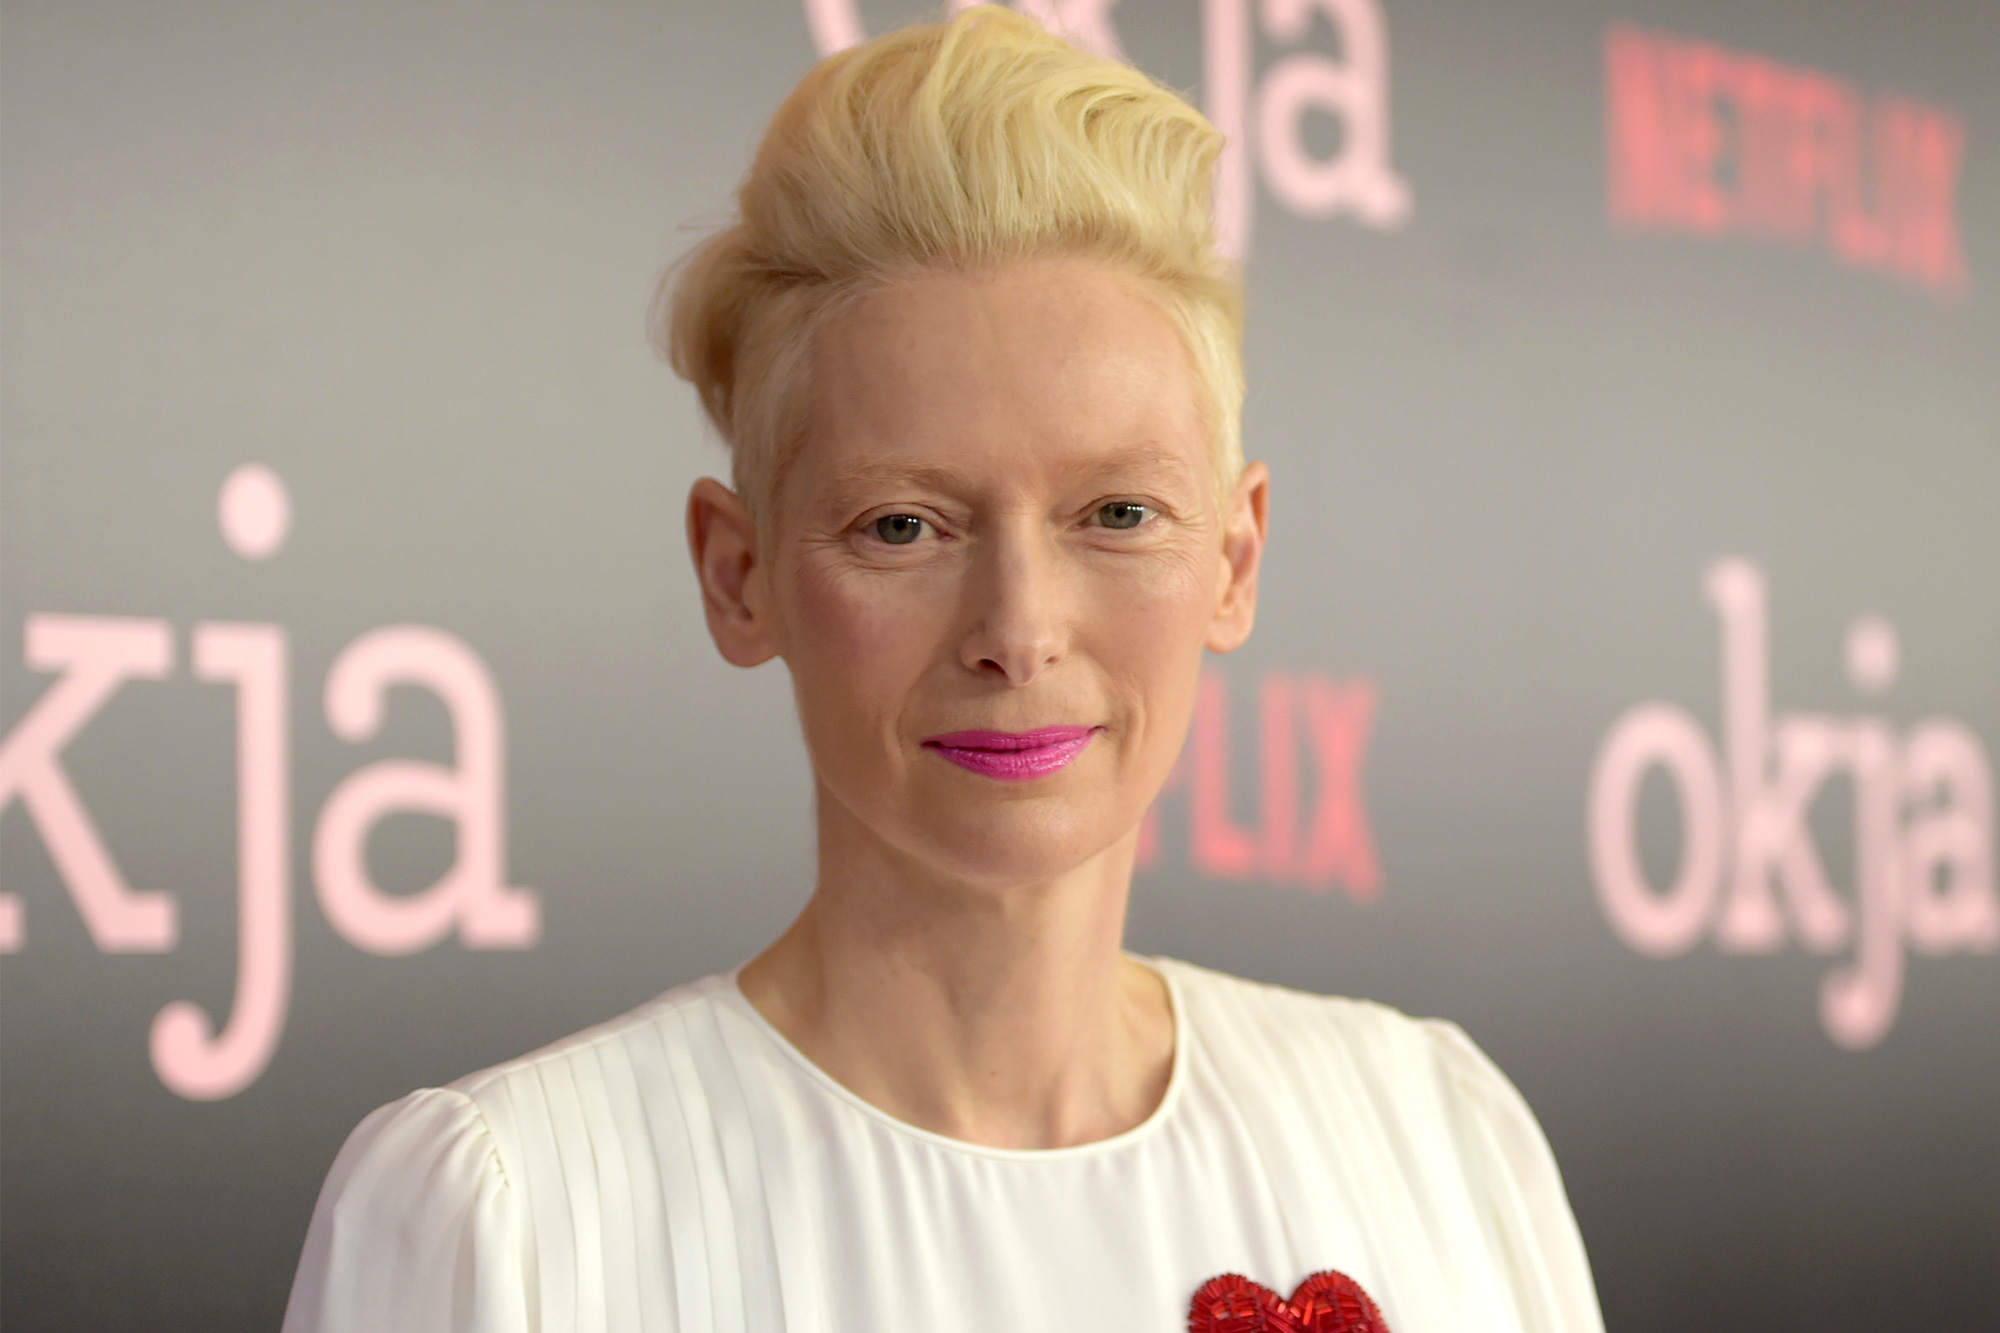 Actress/Co-Produer Tilda Swinton attends "Okja" New York Premiere at AMC Loews Lincoln Square 13 on June 8, 2017 in New York City